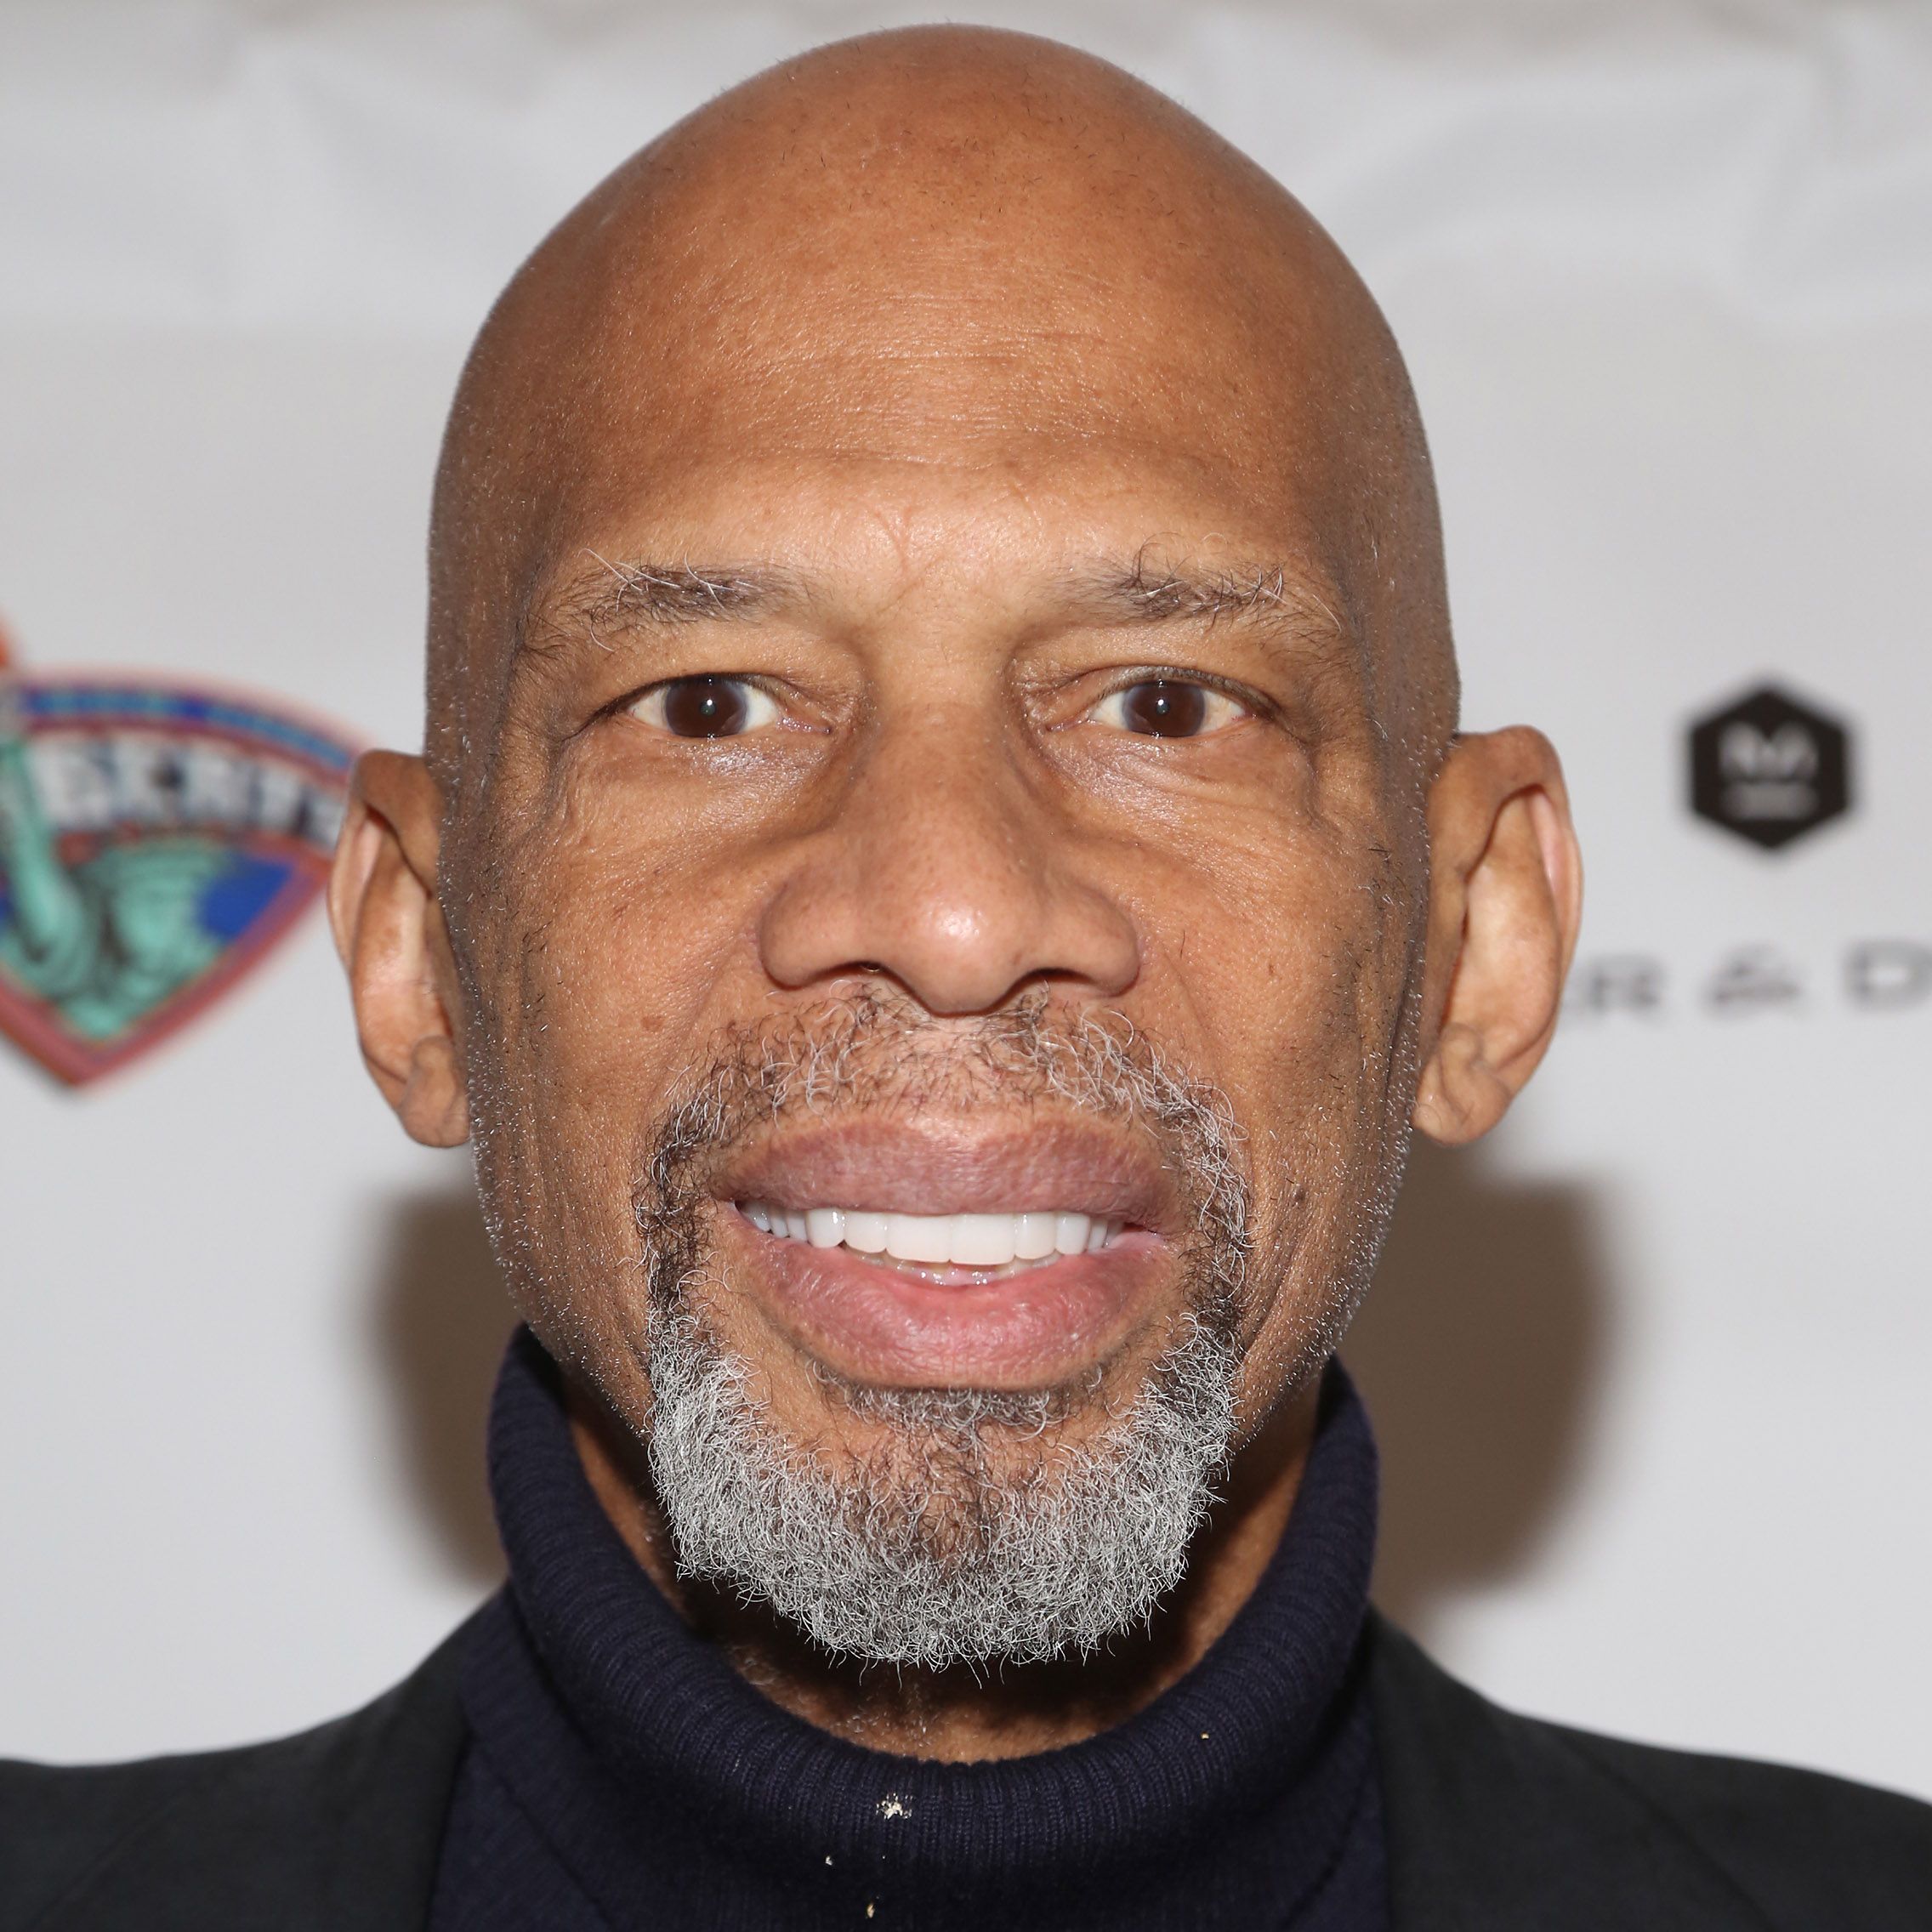 Where is Kareem Abdul-Jabbar's ex-wife from? Looking at the